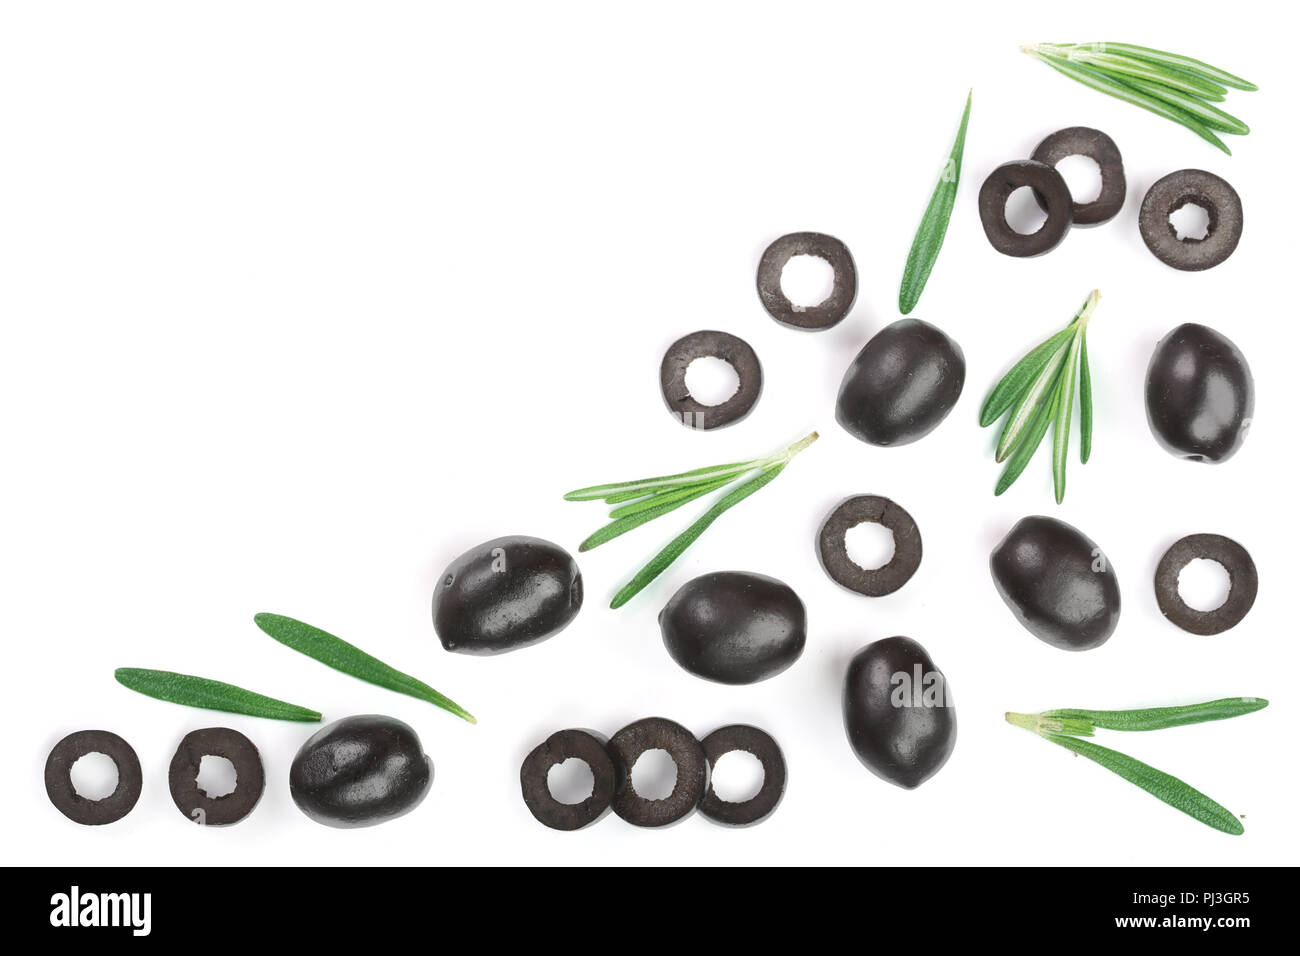 whole and sliced black olives with rosemary leaves isolated on white background. Top view. Flat lay pattern Stock Photo